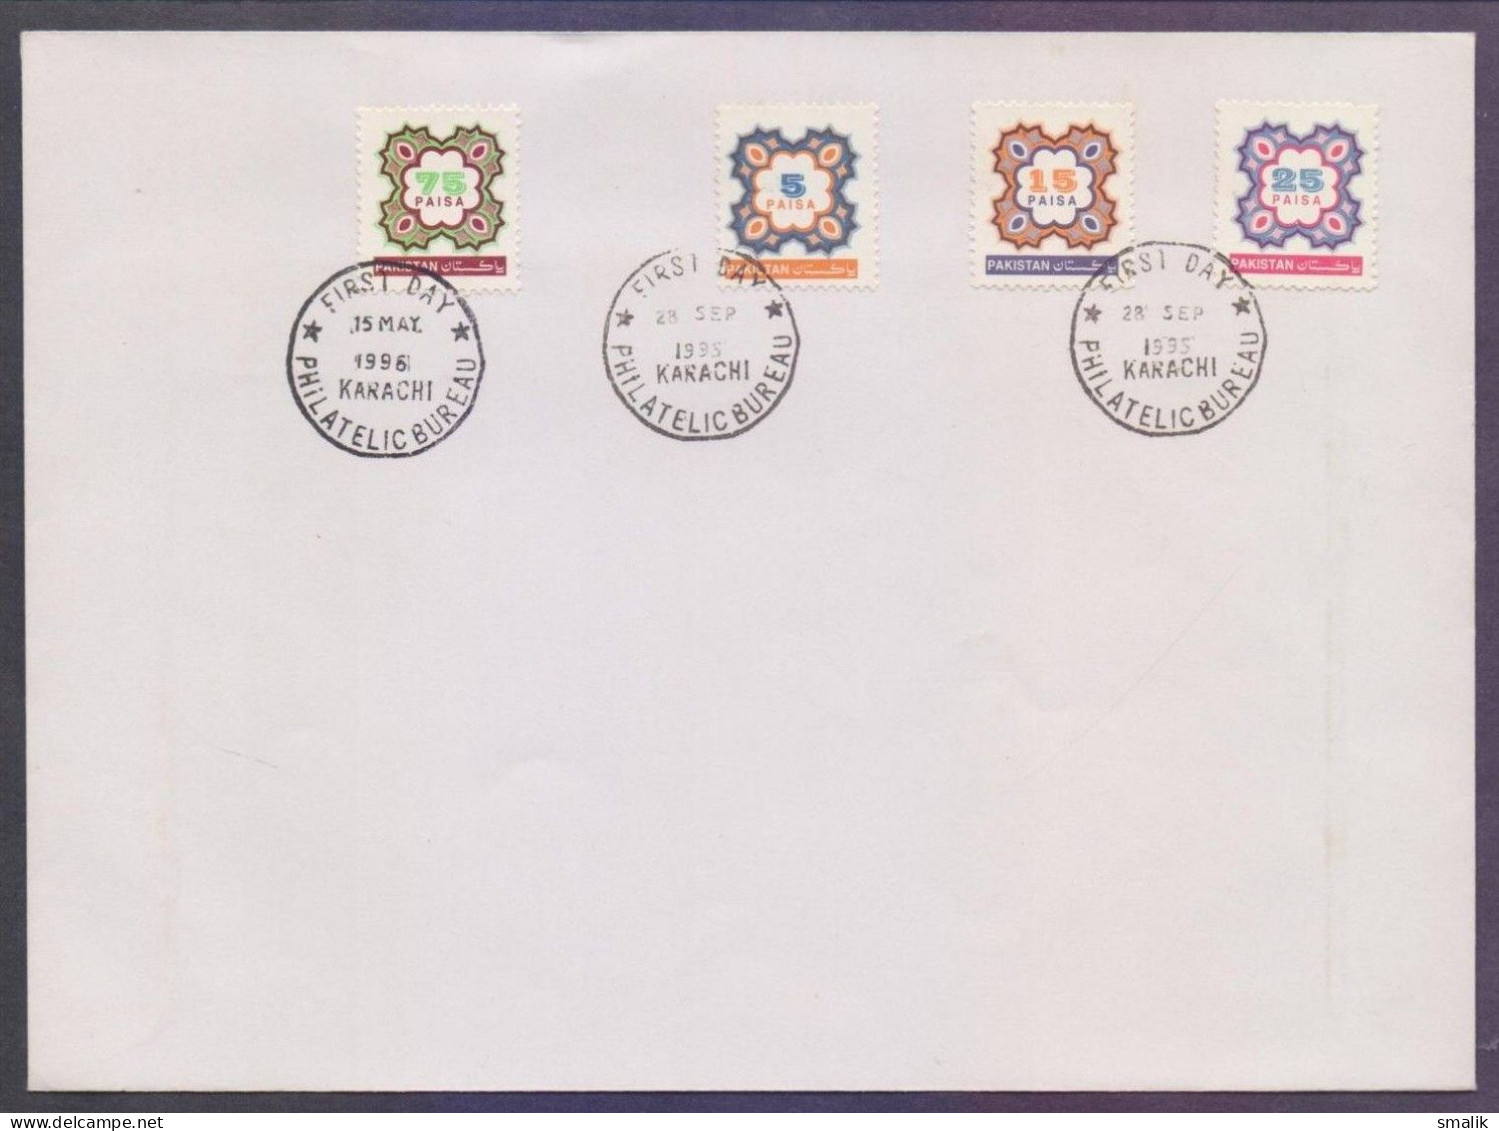 PAKISTAN 1995 - 1996 FDC - Geometrical Design Definitive Complete Set On Plain First Day Cover - Pakistan